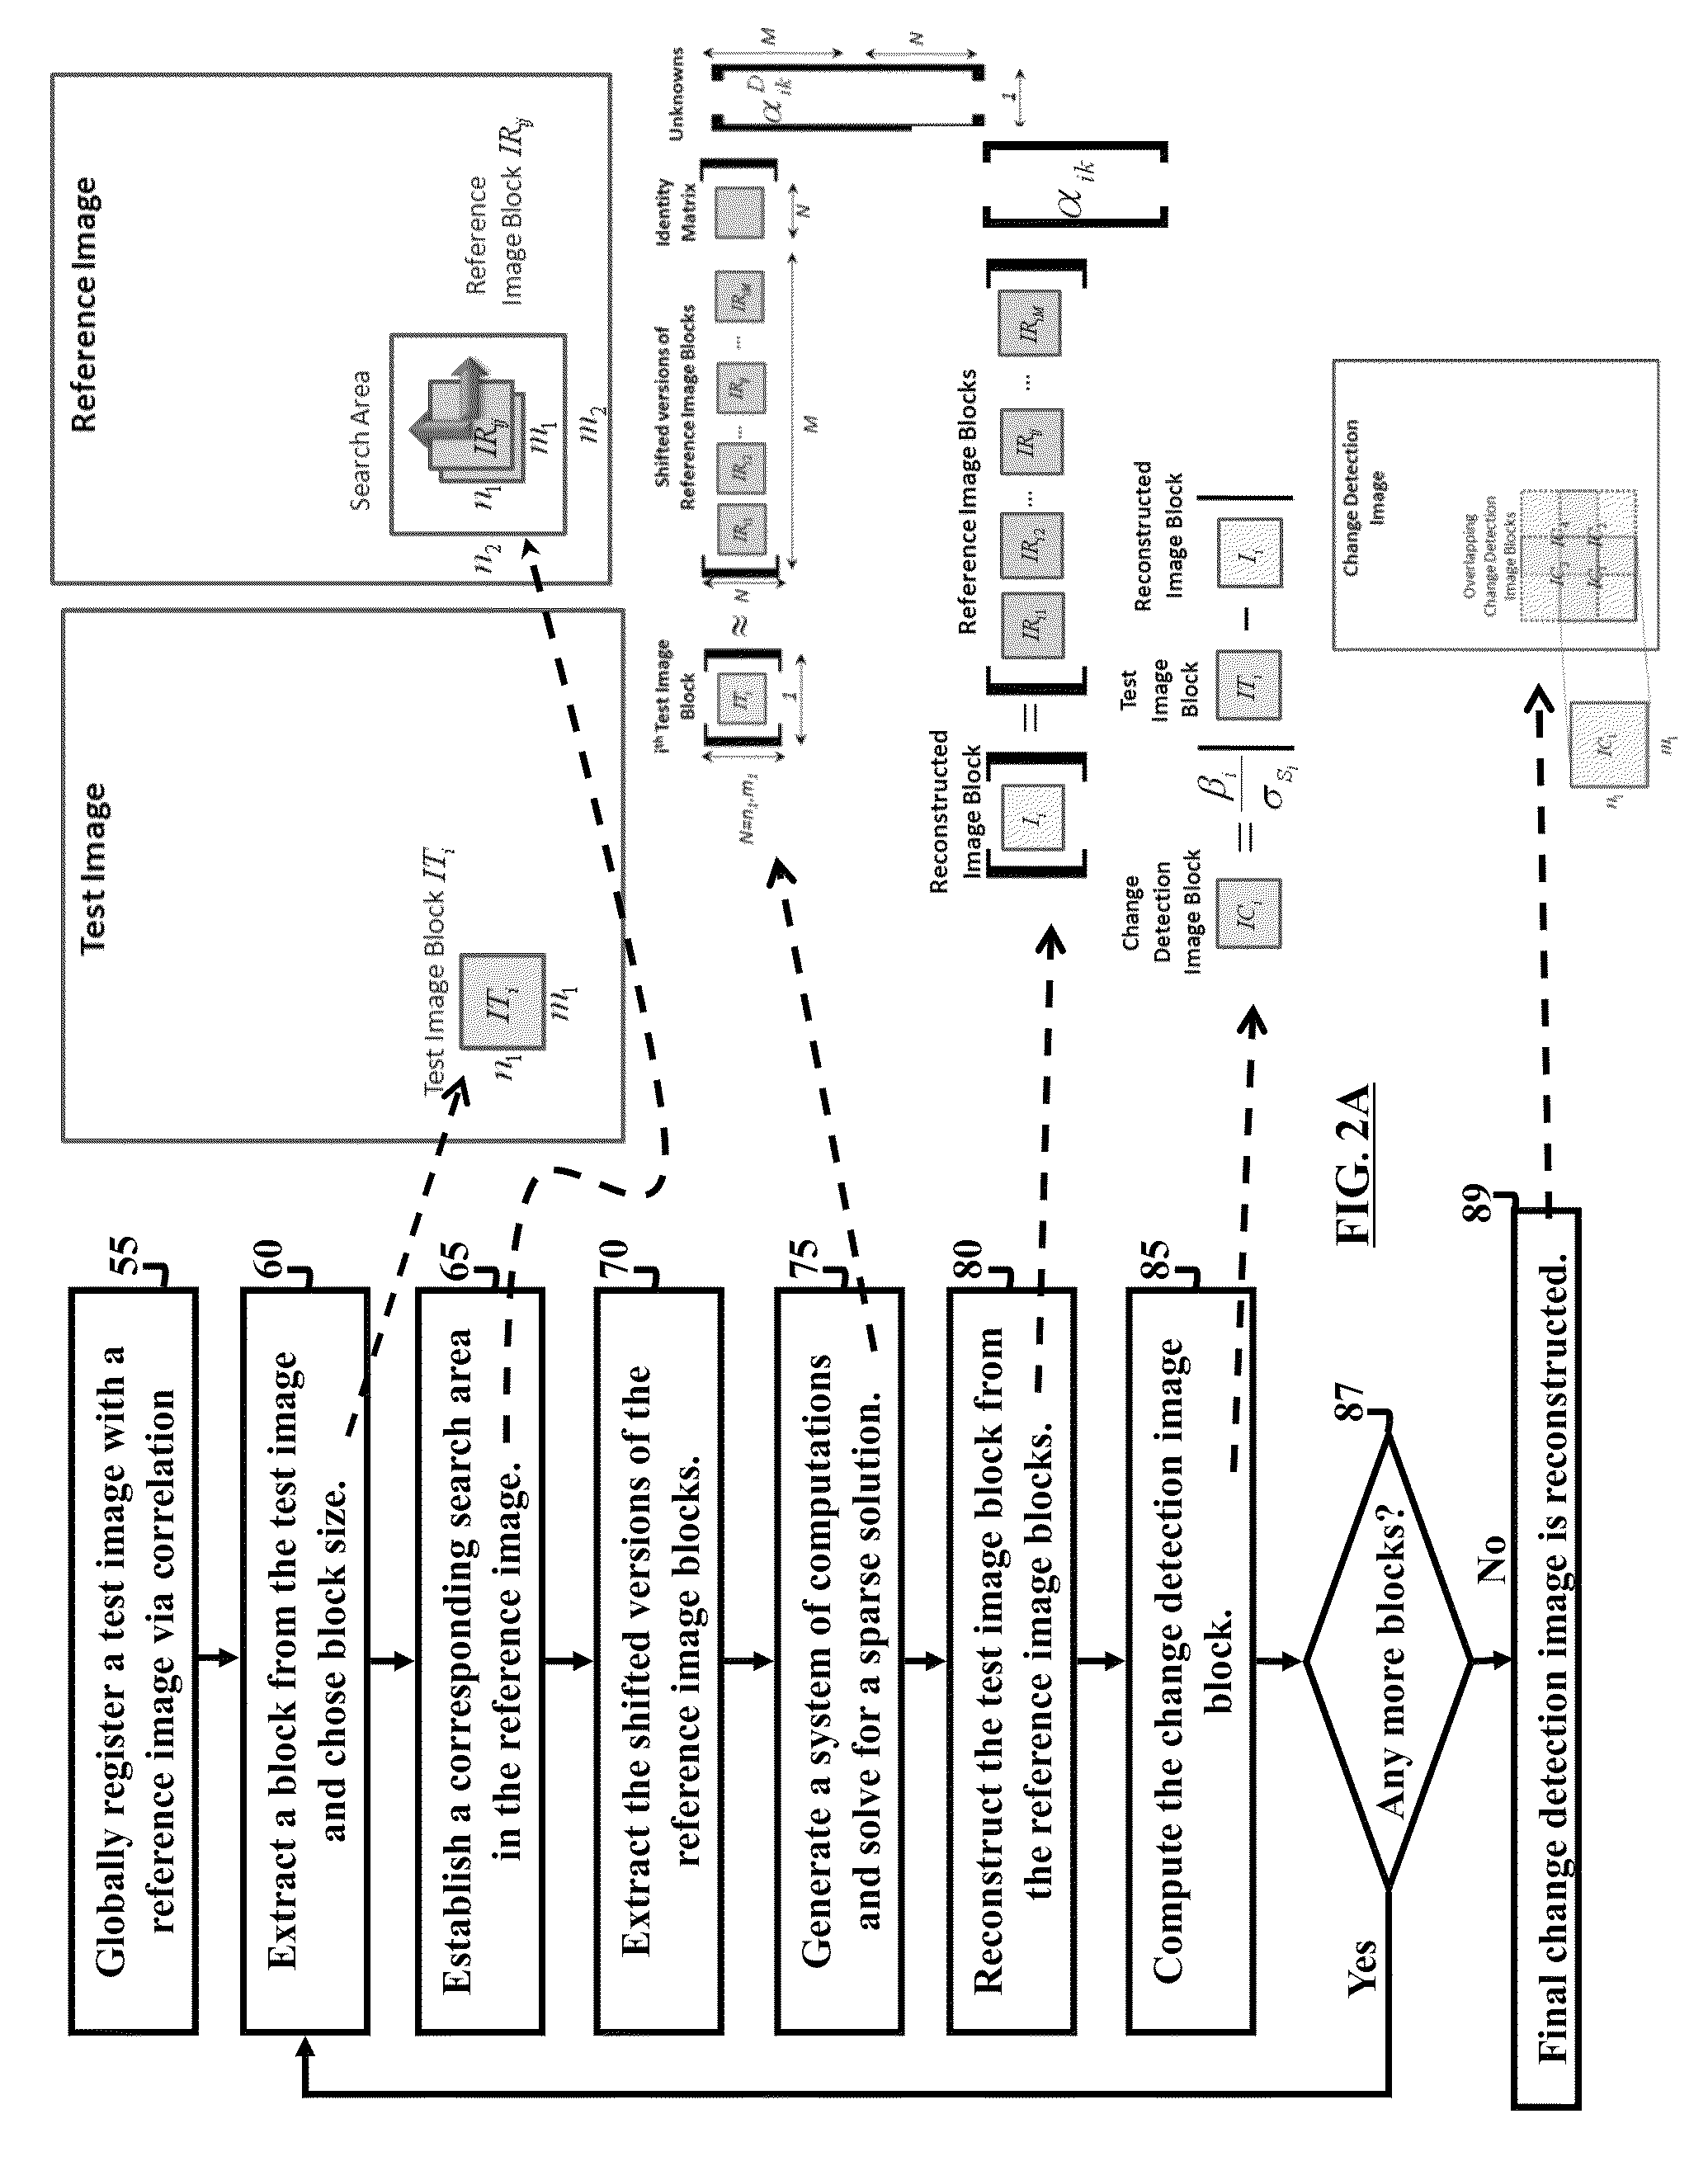 Method and system for image registration and change detection